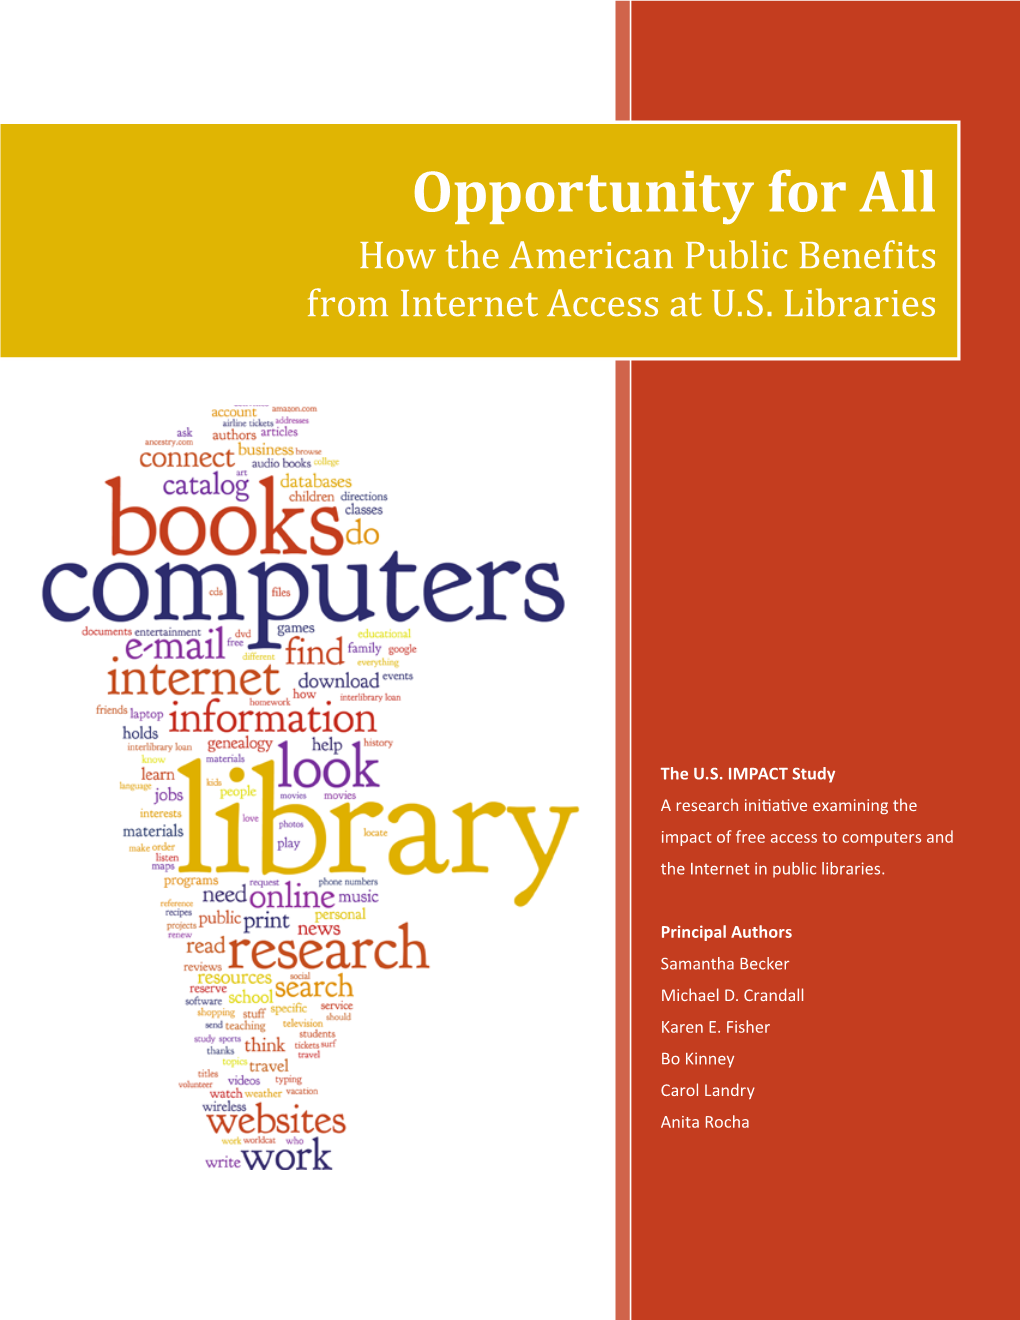 Opportunity for All: How the American Public Benefits from Internet Access at U.S